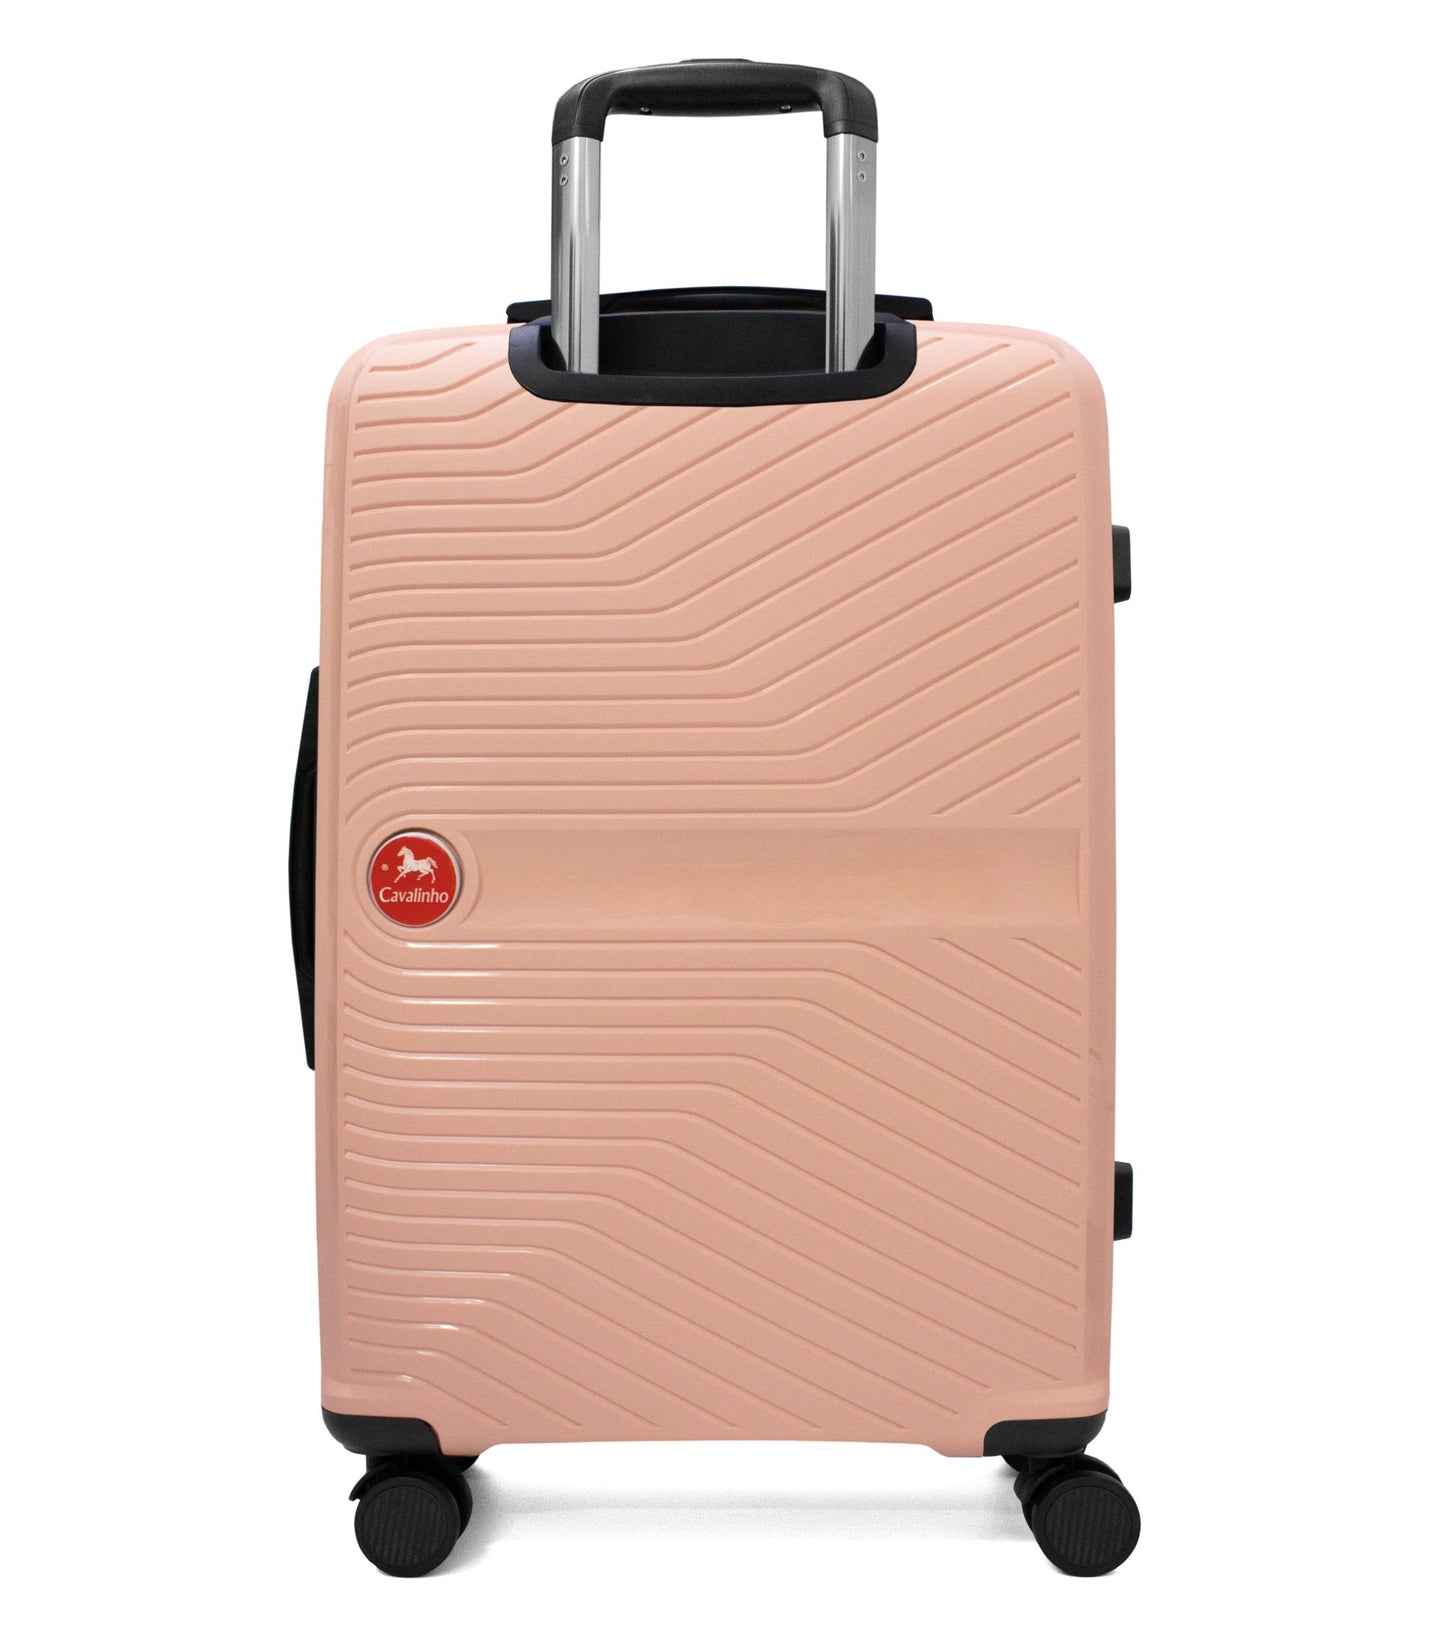 Cavalinho Colorful Check-in Hardside Luggage (24") - 24 inch Salmon - 68020004.11.24_3